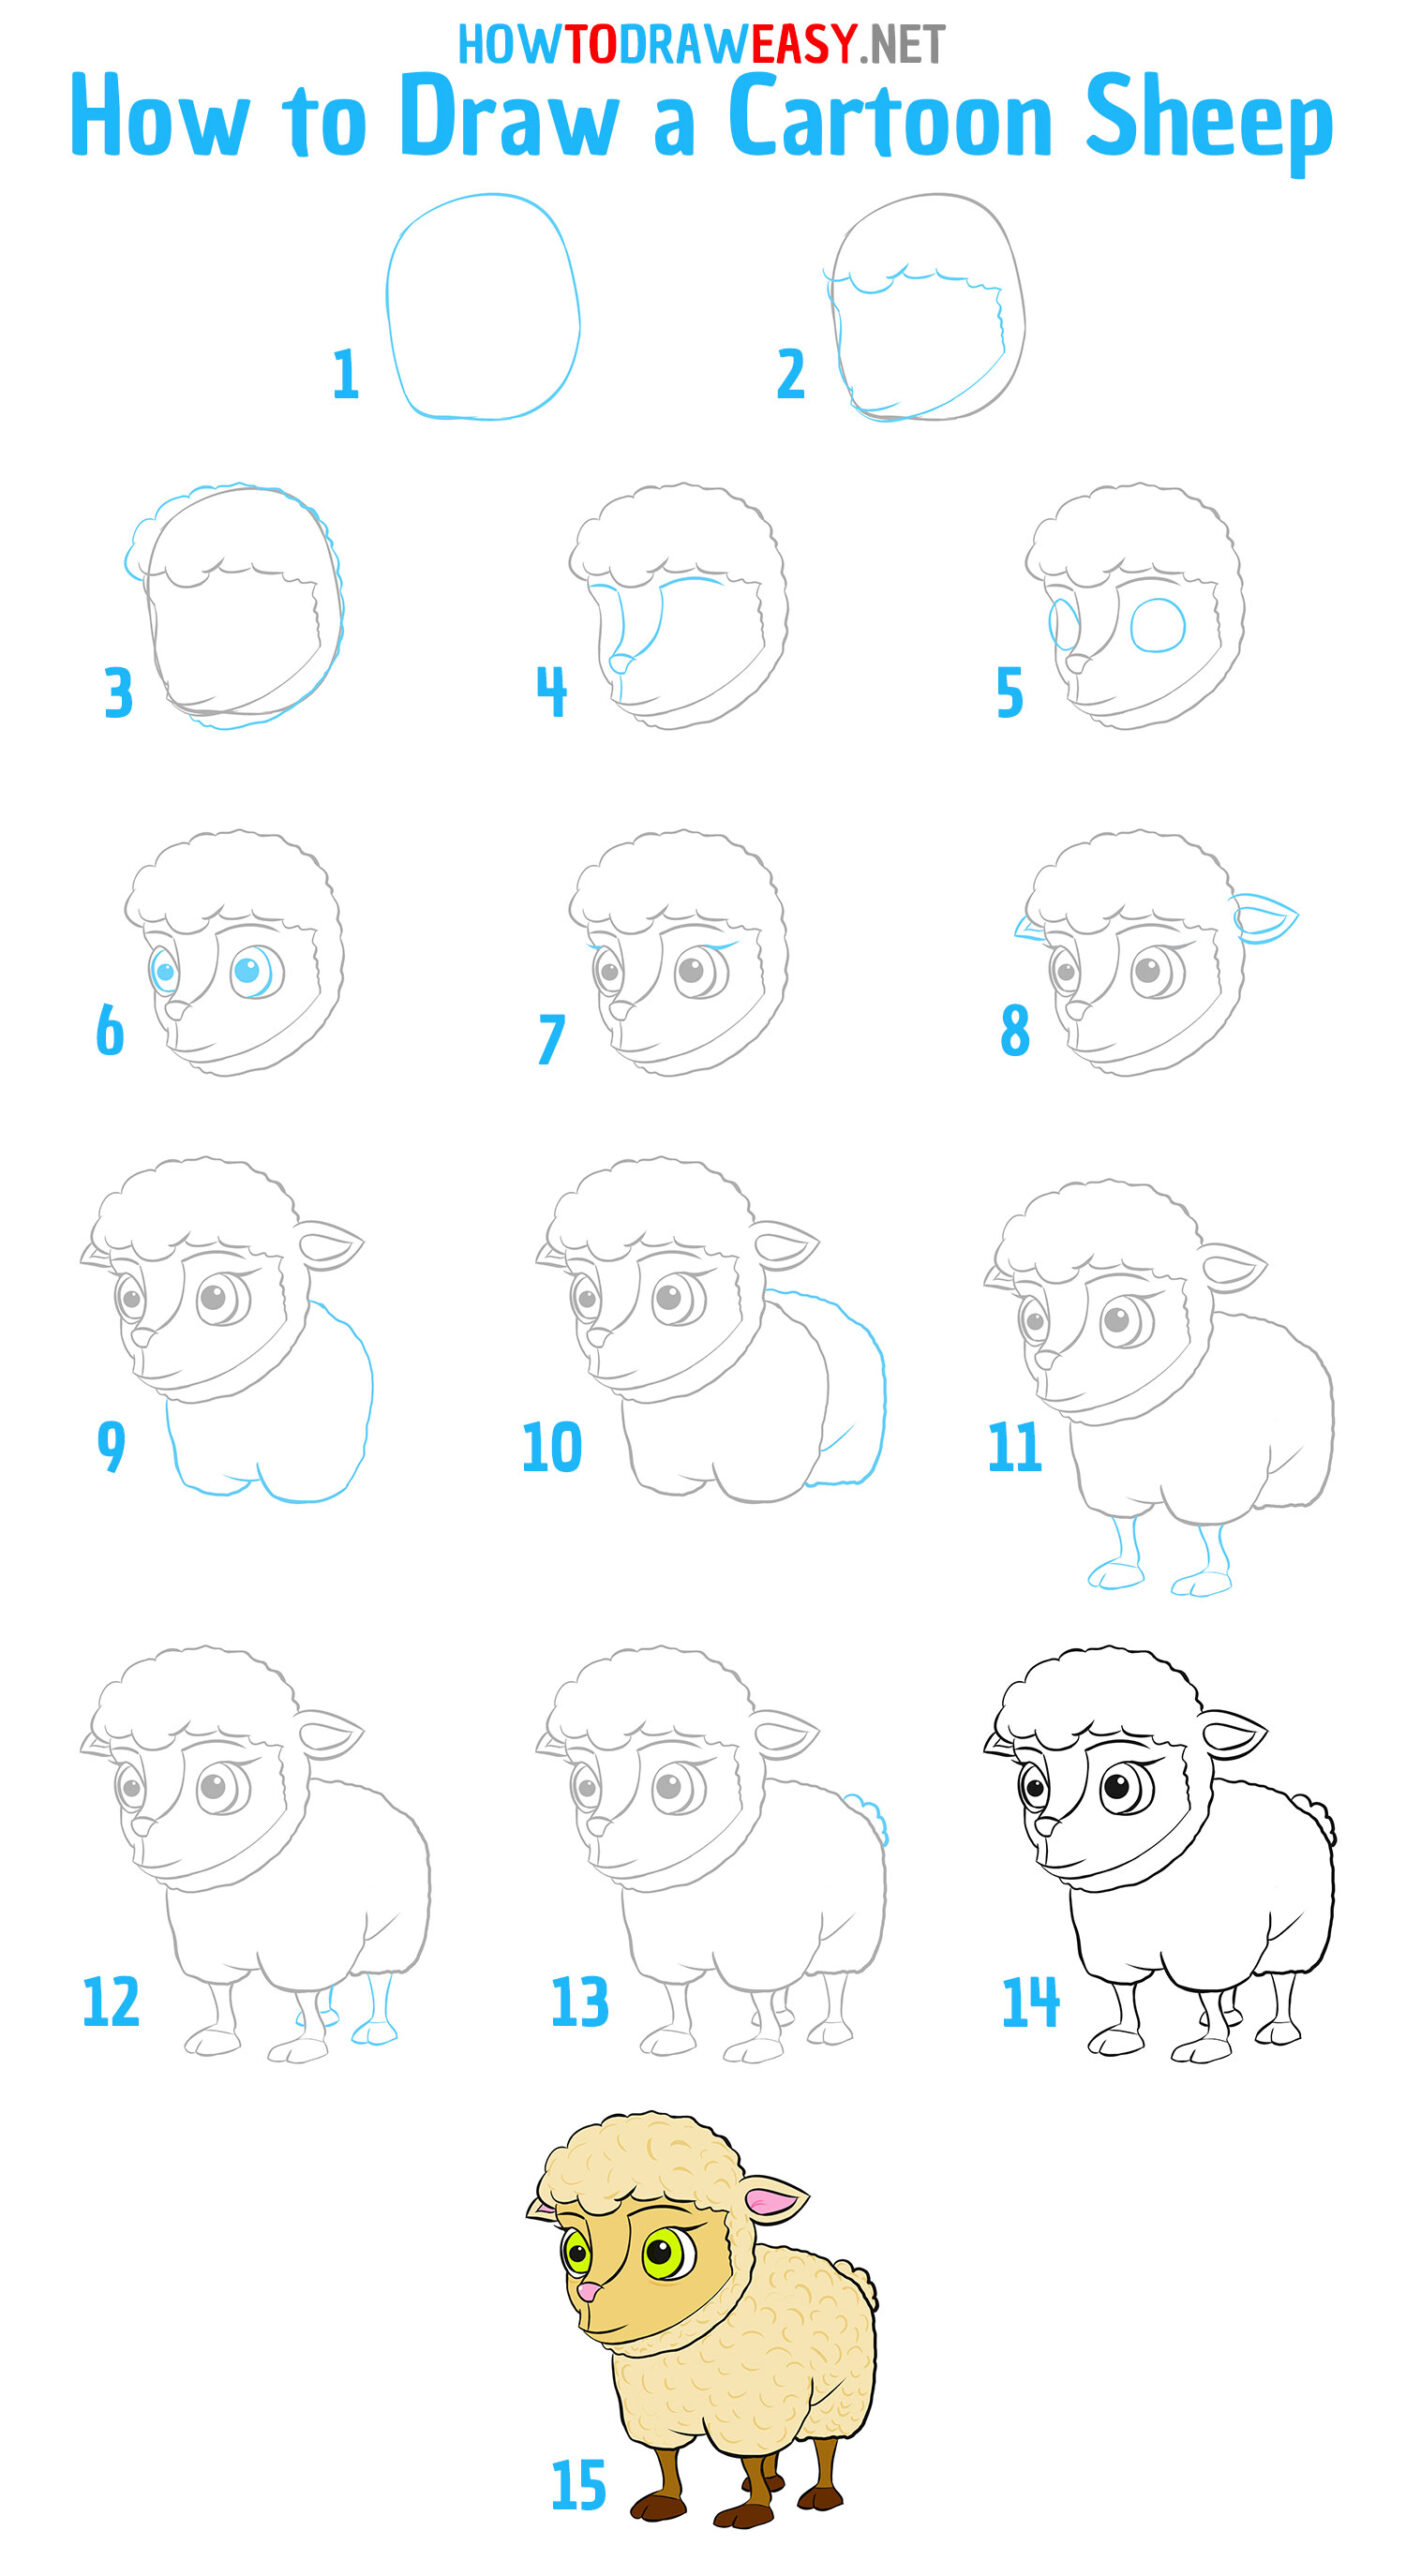 How to Draw a Cartoon Sheep Step by Step